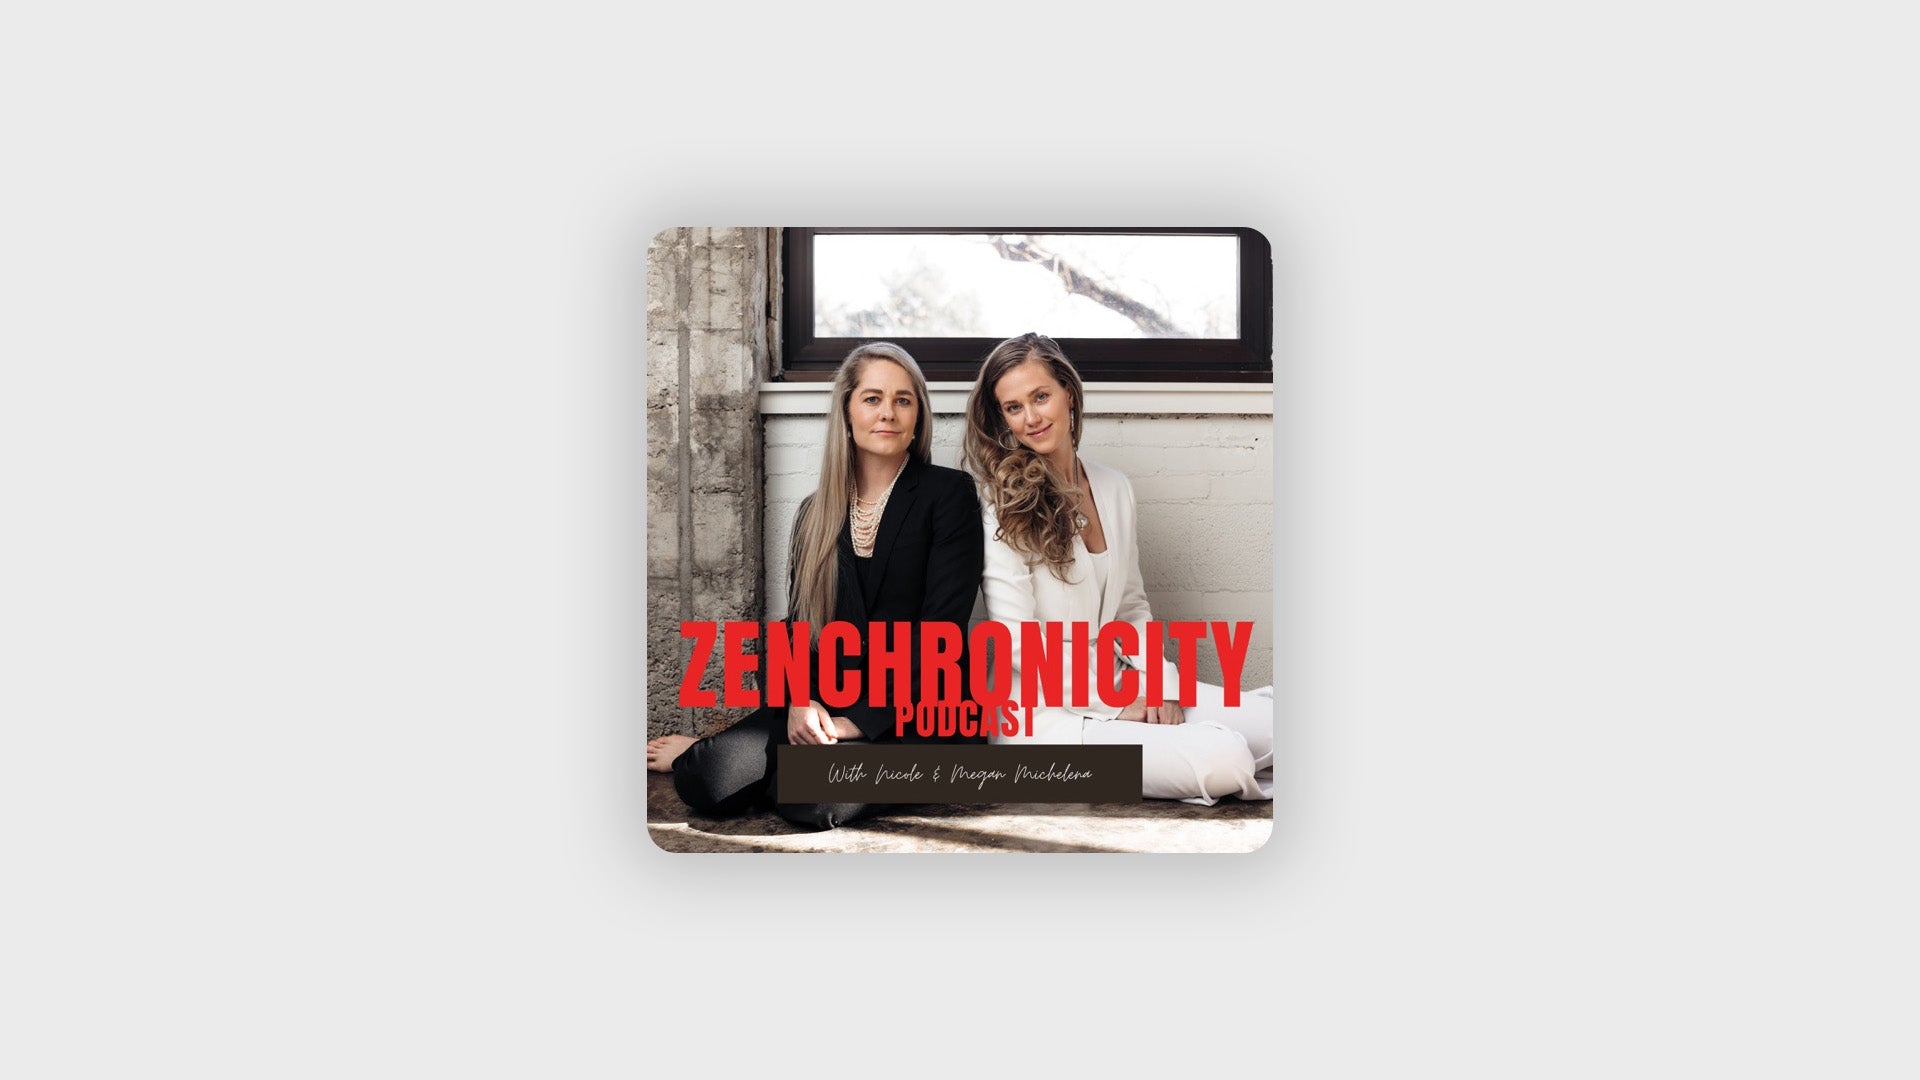 The Zenchronicity Podcast is co-hosted by sisters Nicole and Megan Michelena, known as the Zenchronicity Sisters. 